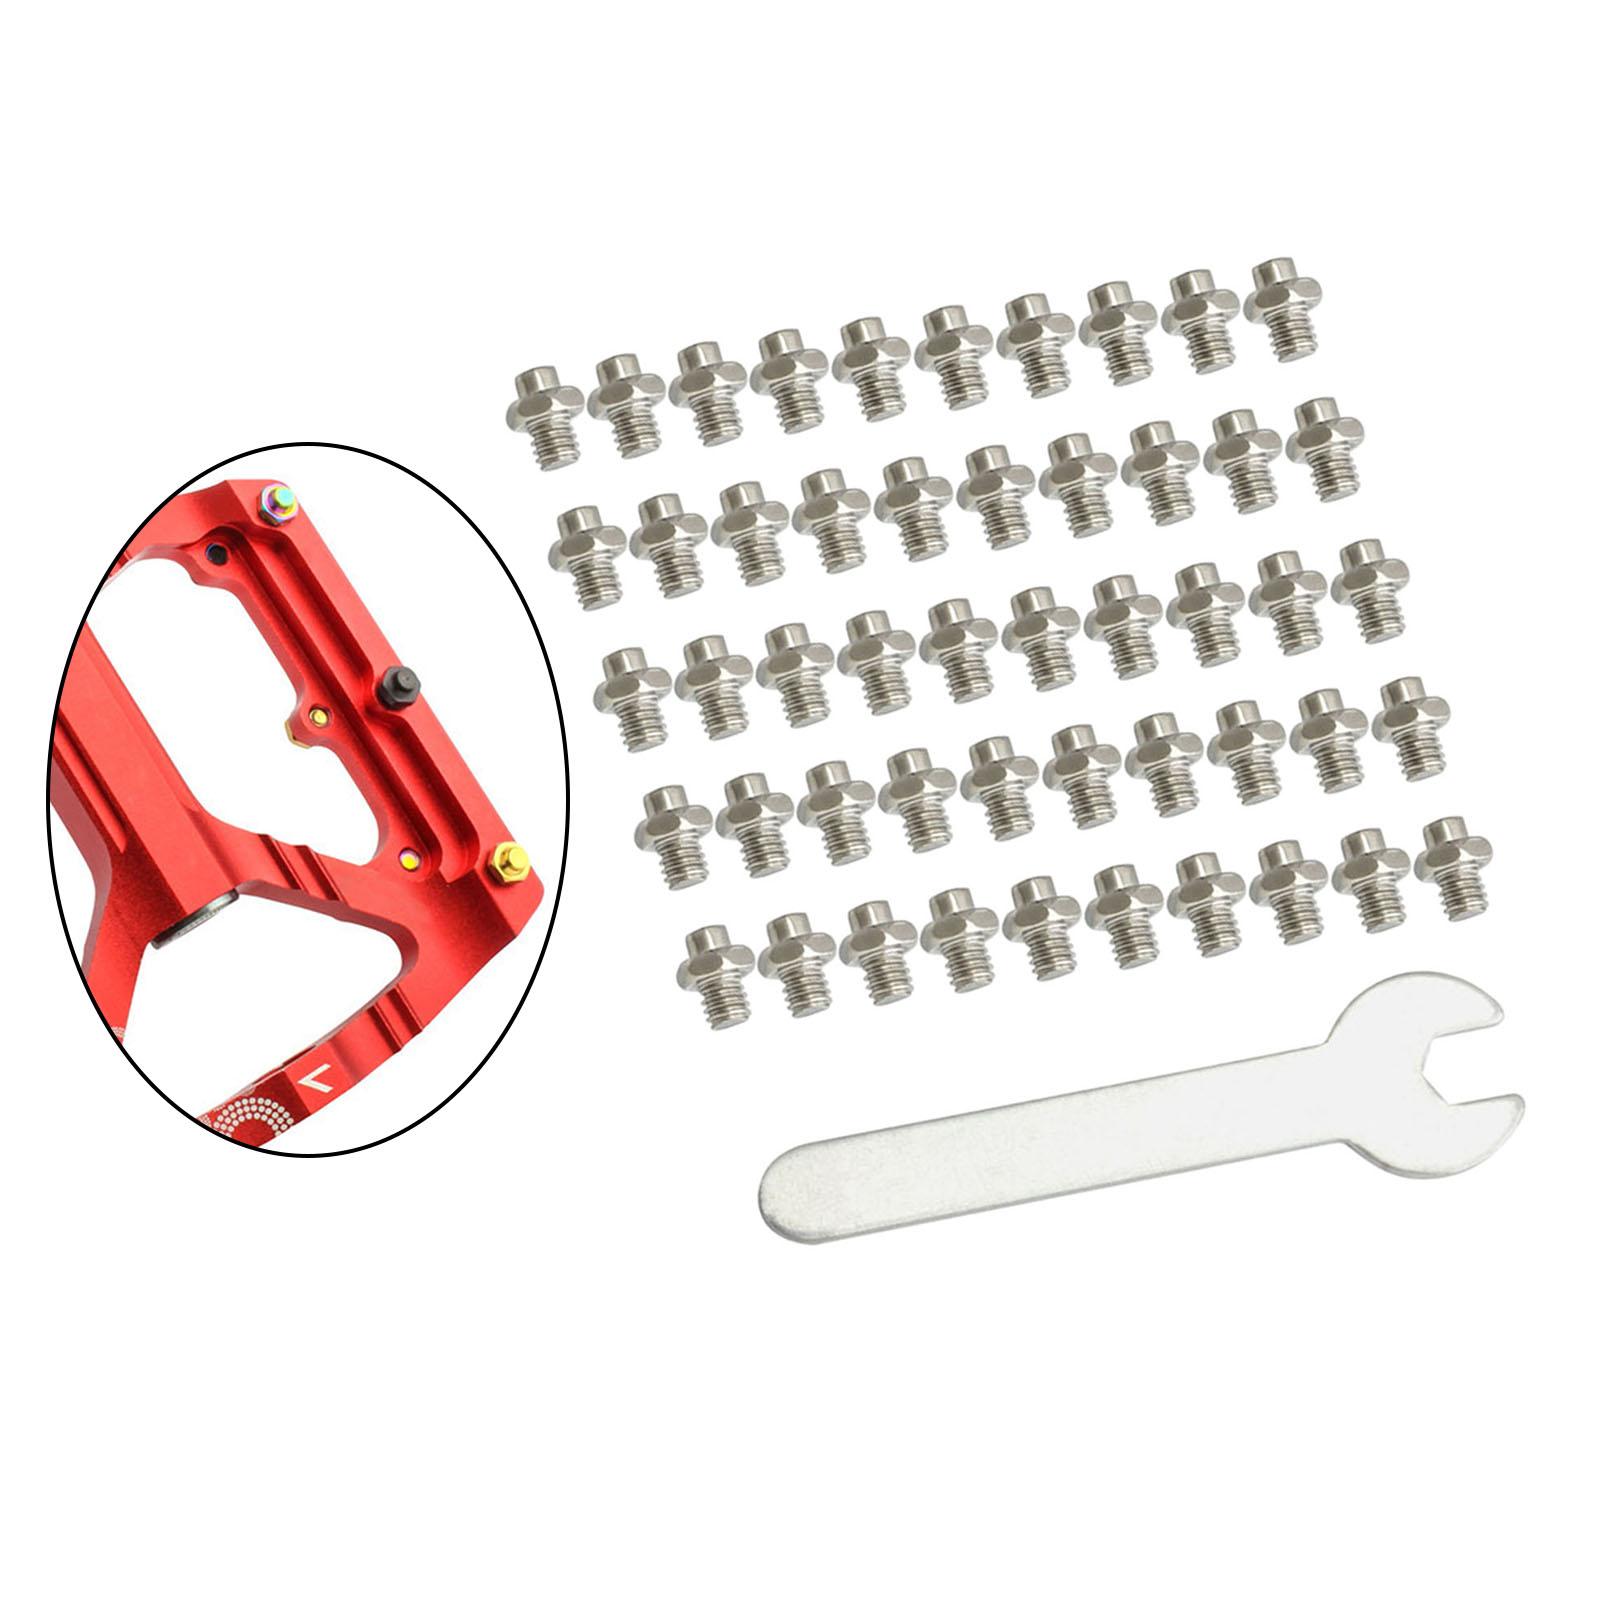 50 Pieces Stainless Steel Bike Pedal Screws Fixed Studs Anti-Slip Bolts Accs Silver